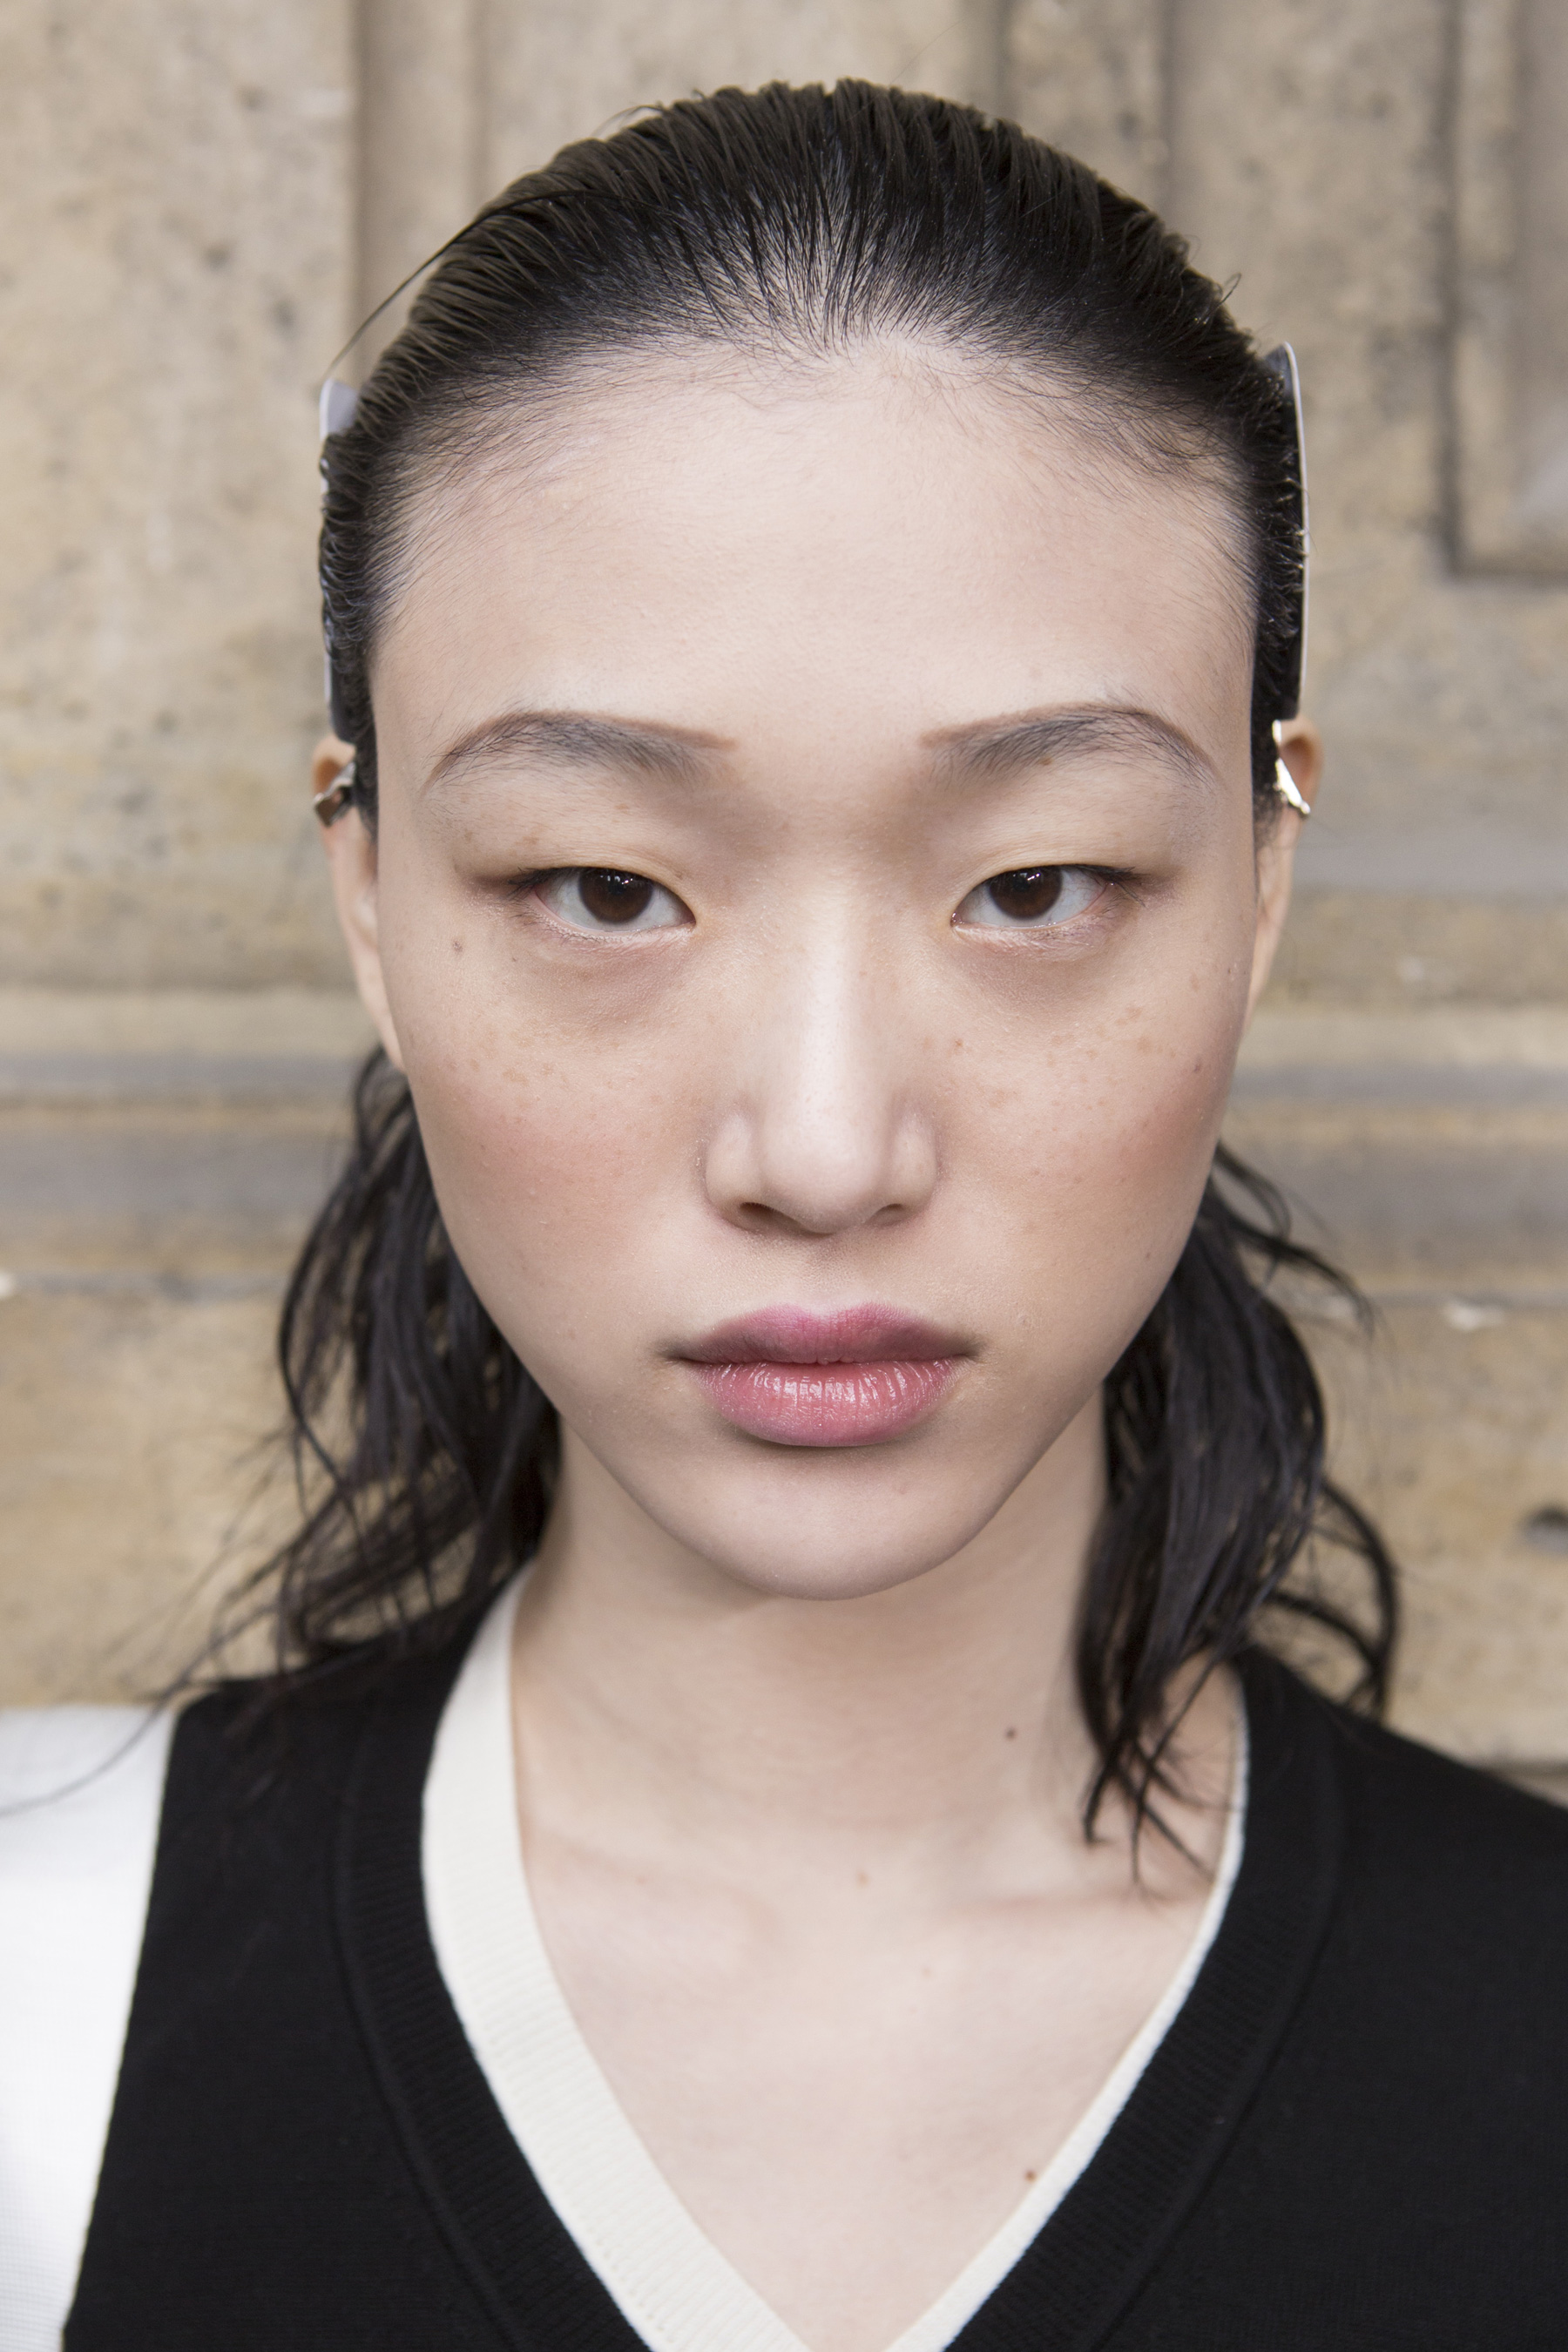 Proenza Schouler Spring 2018 Fashion Show Backstage Beauty - The Impression